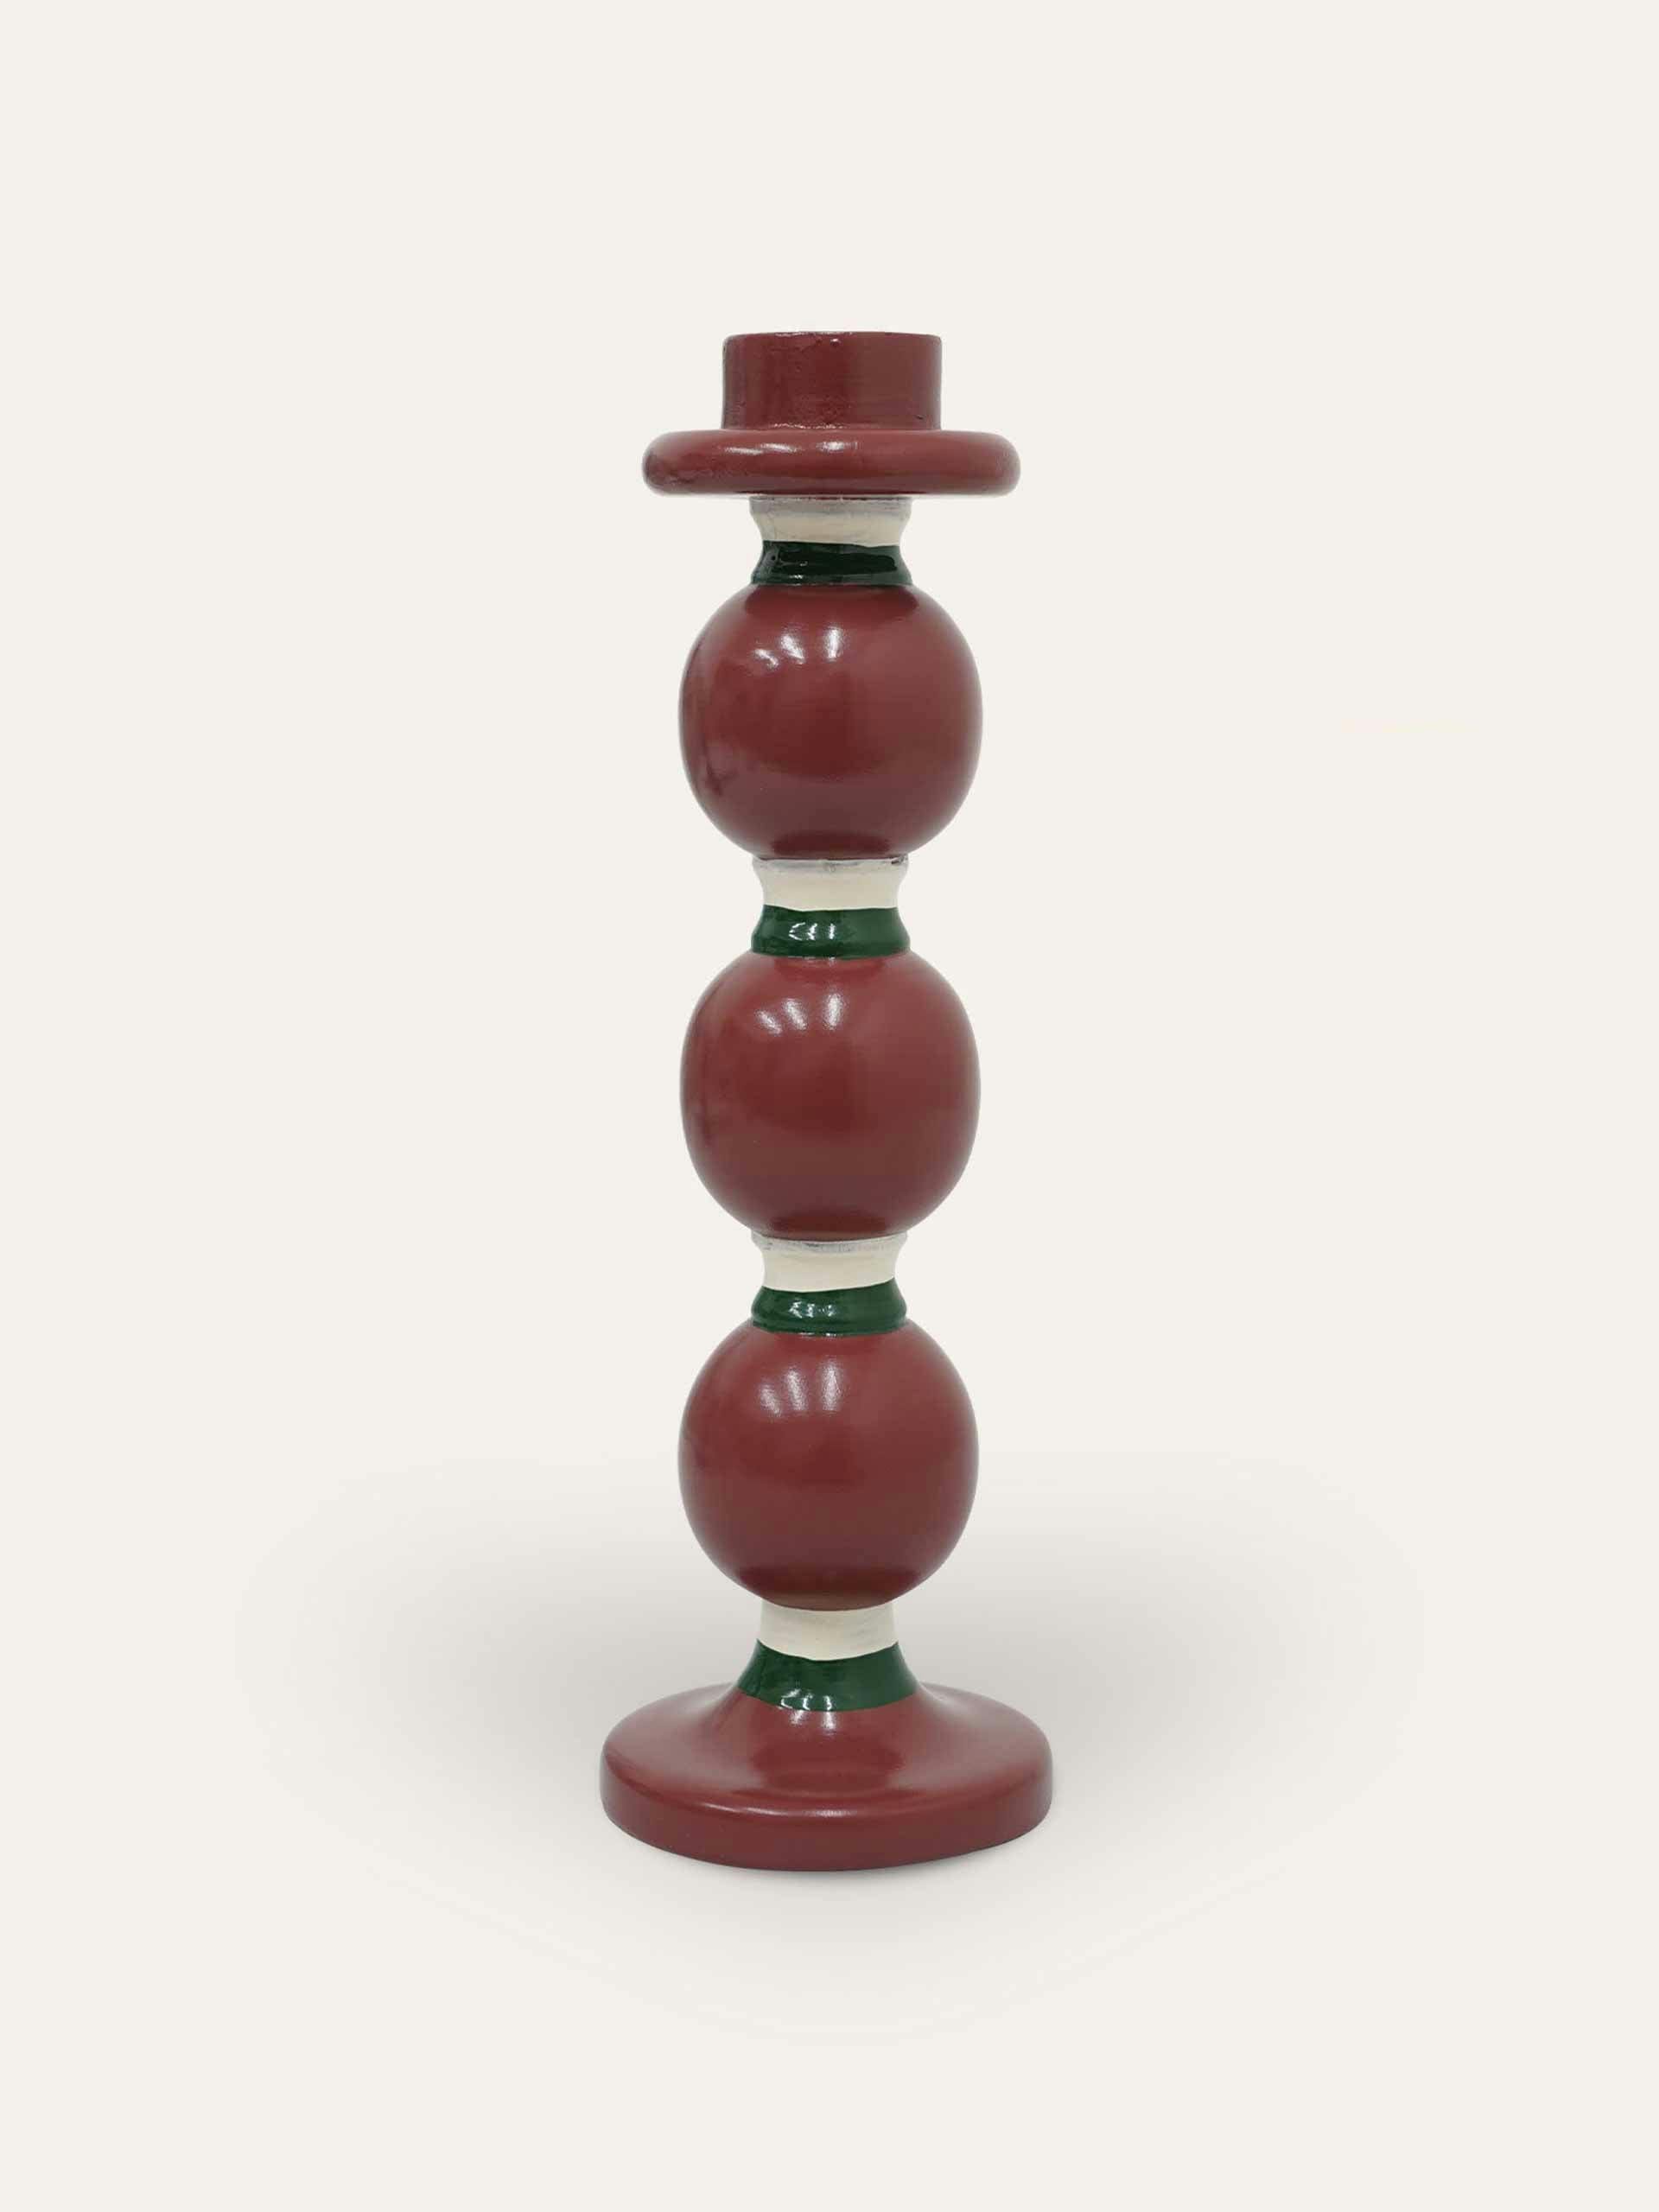 The Sensational Stripey candlestick in red and green